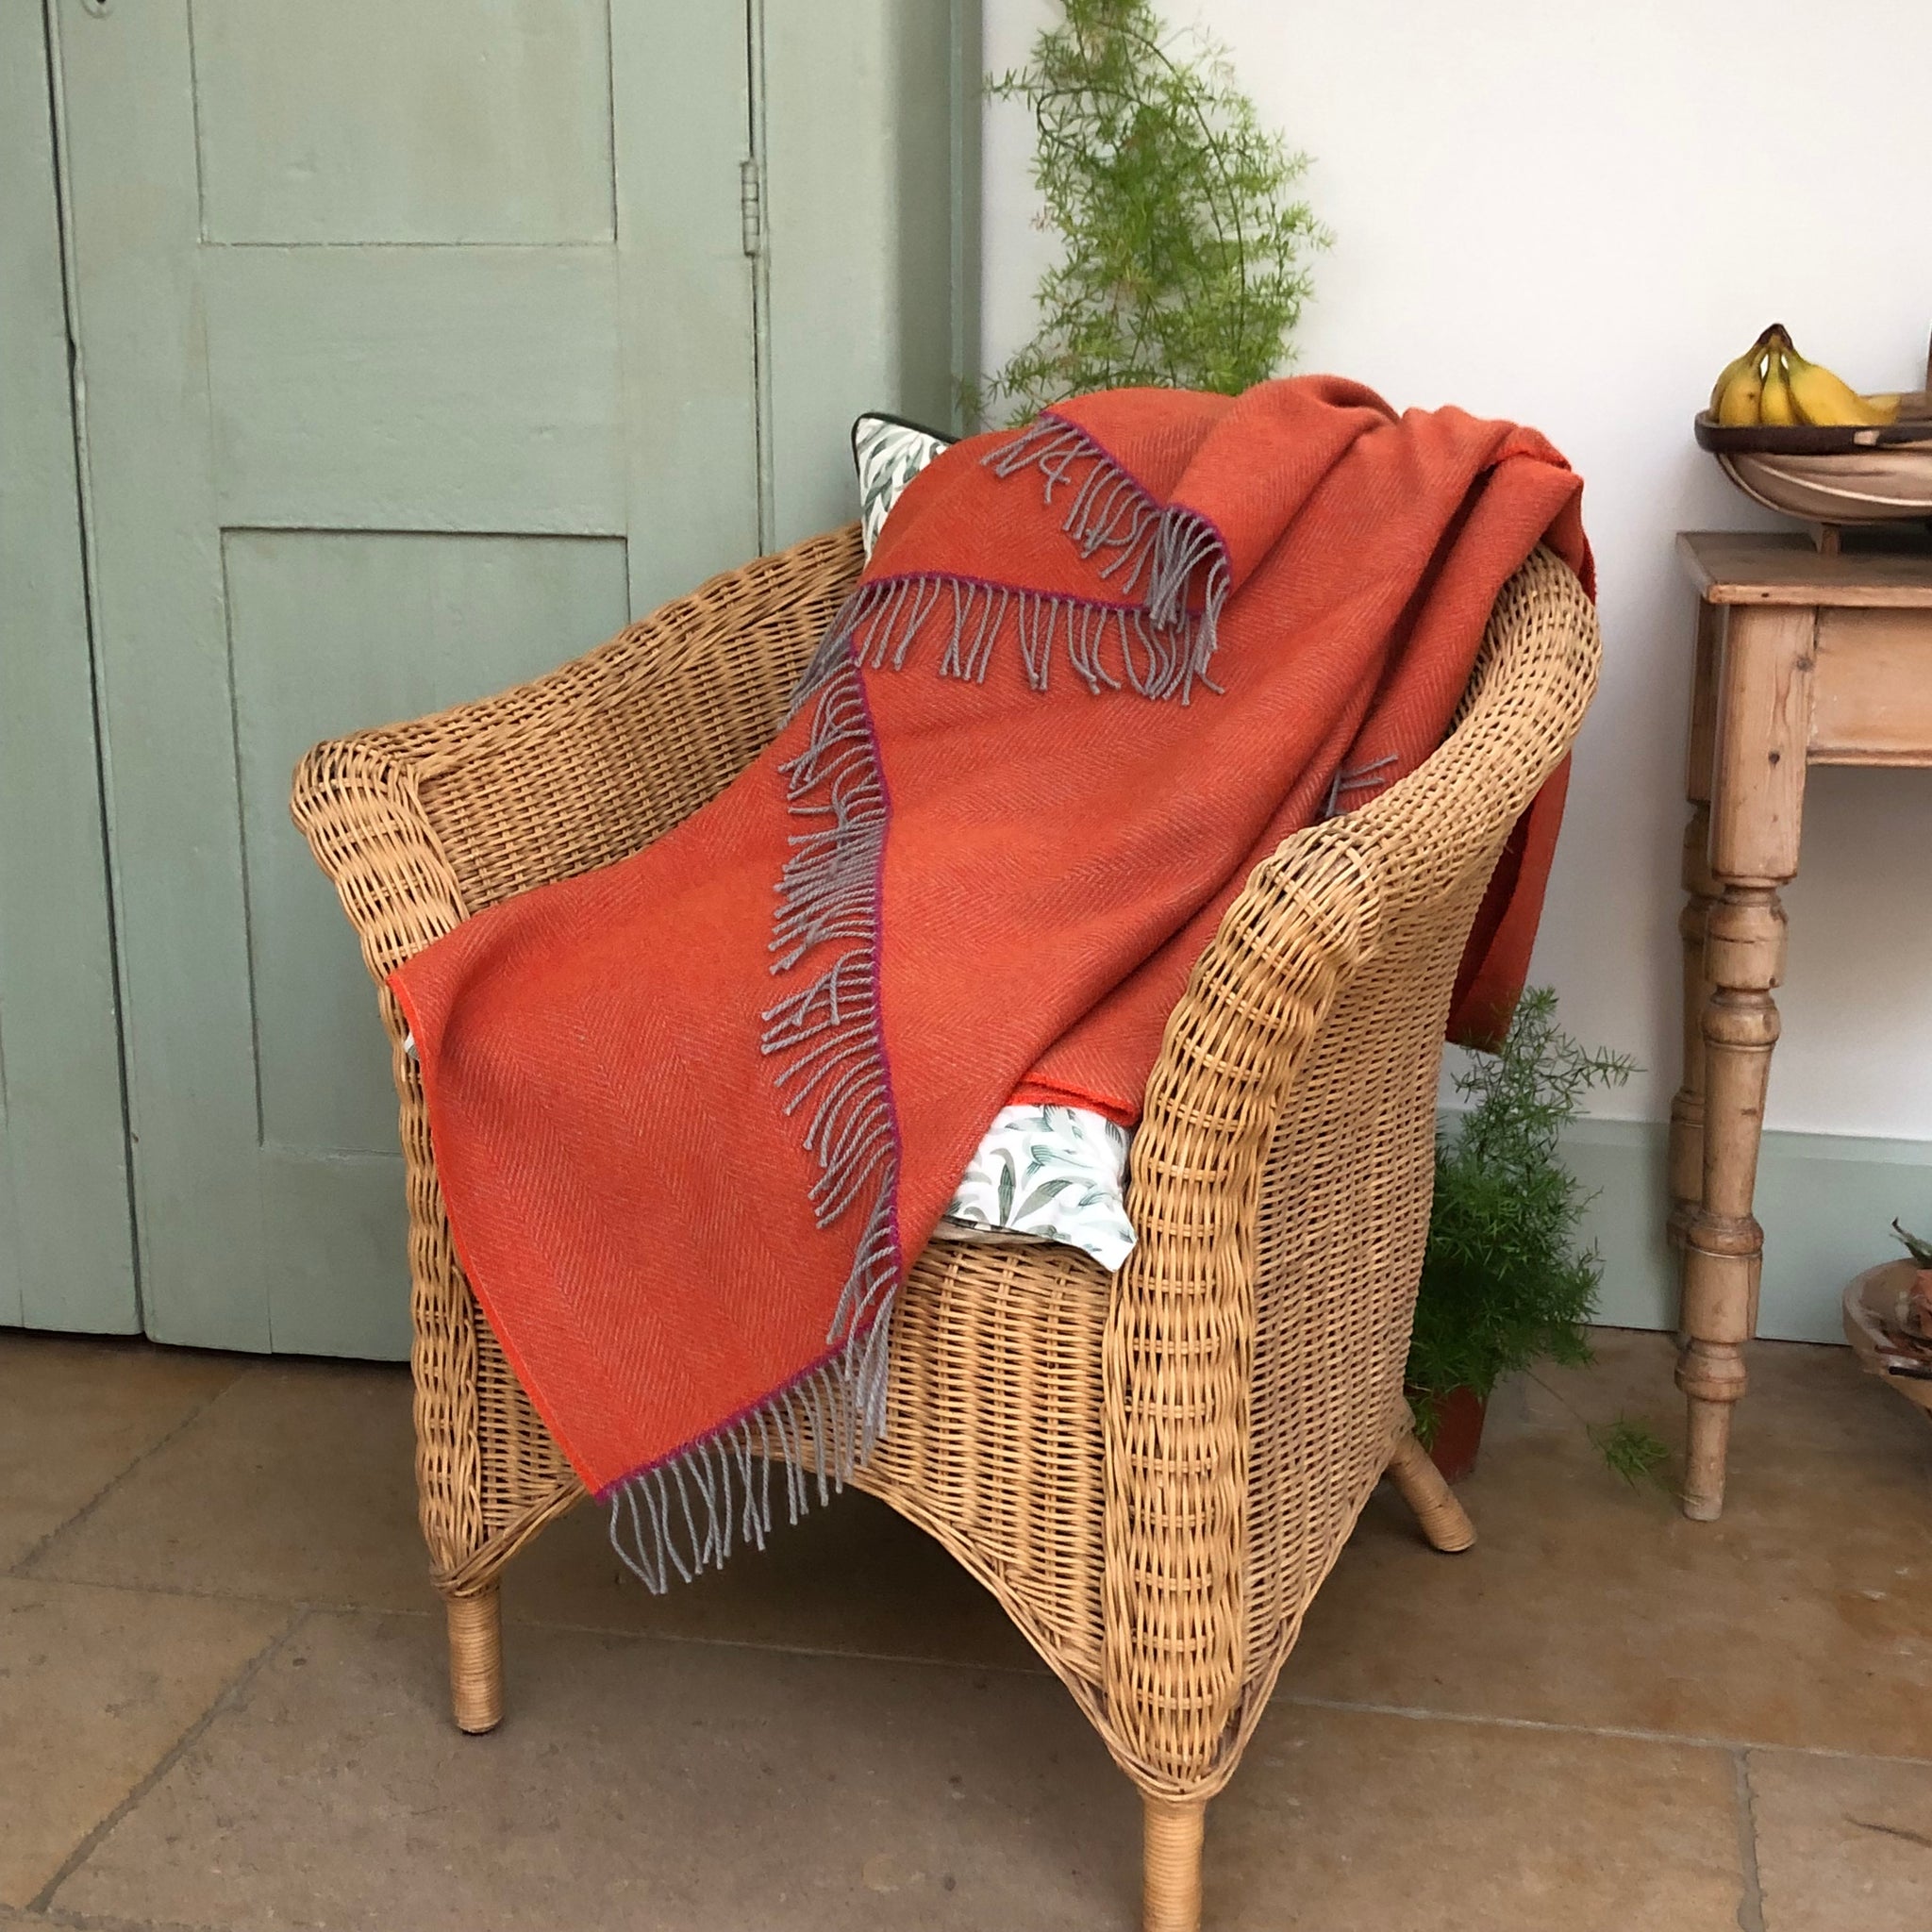 Orange thwo on a wicker chair in a conservatory